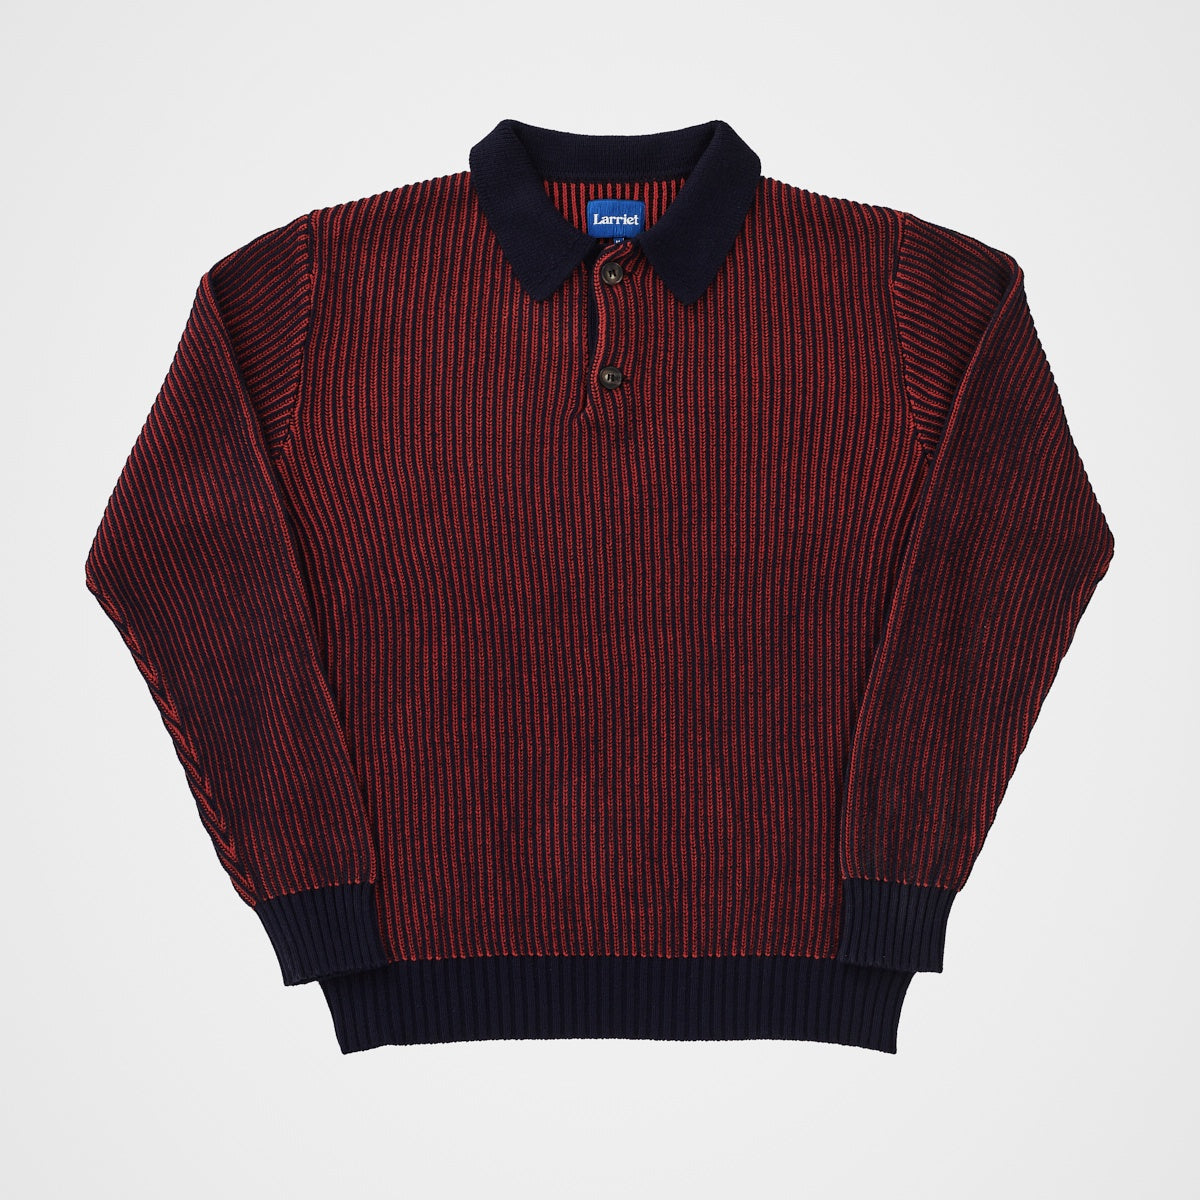 Fishermans Polo - Navy / Red